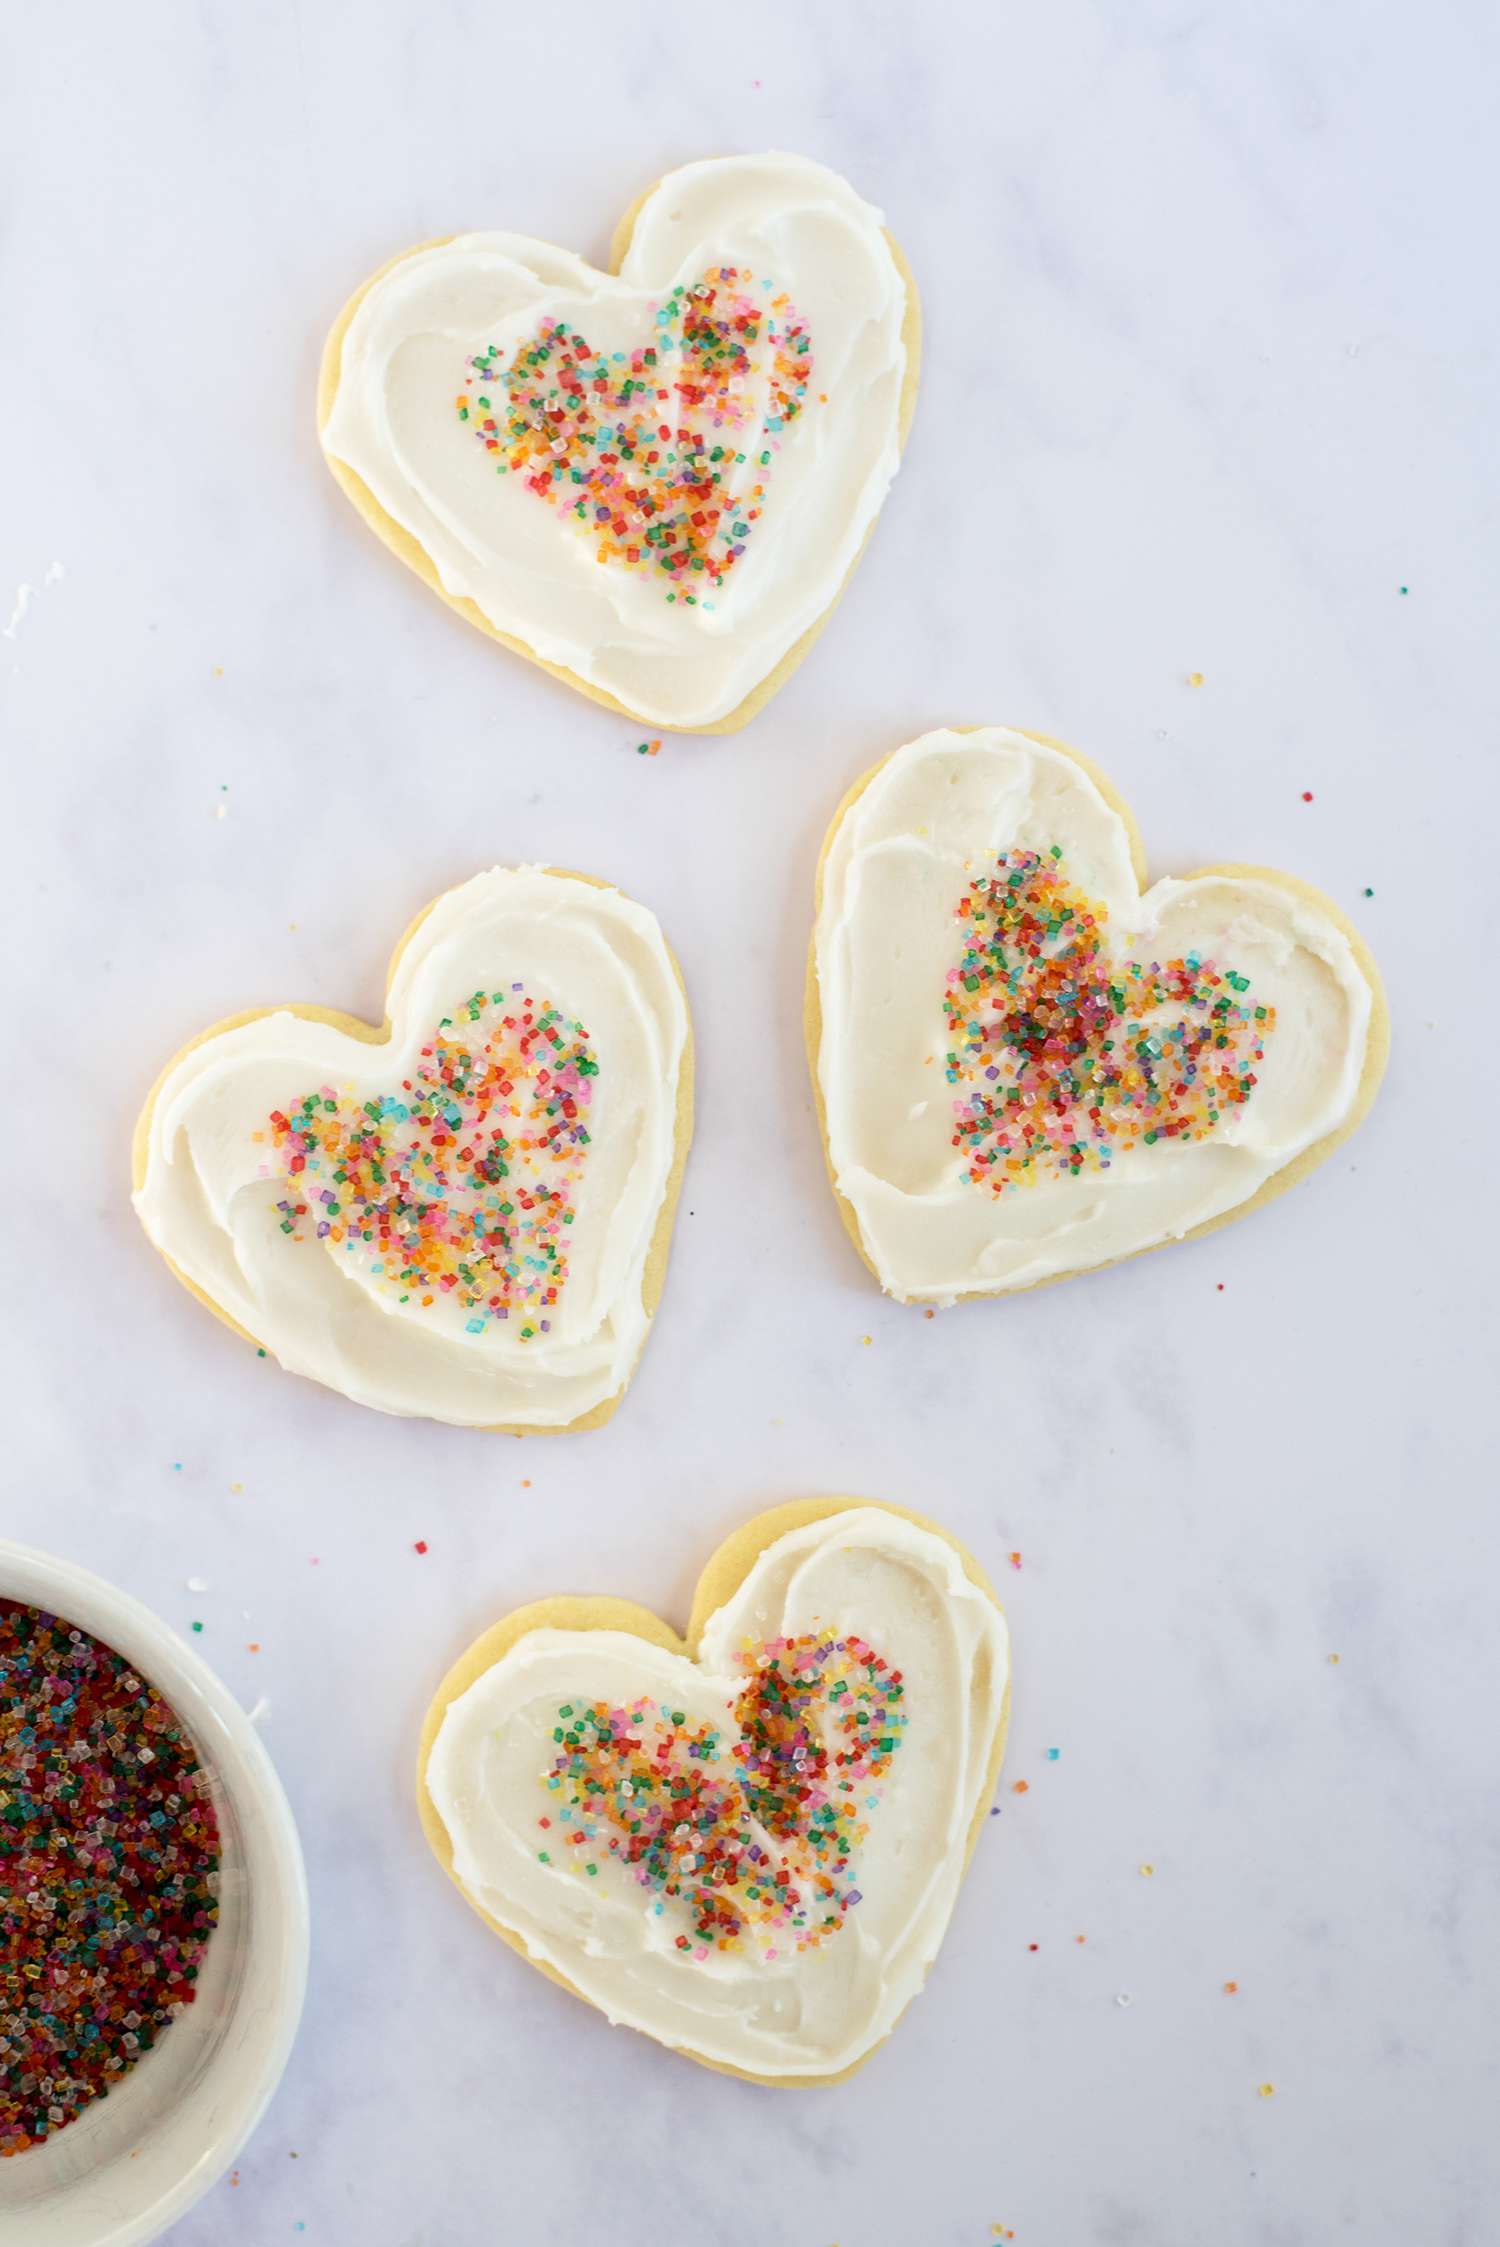 finished heart-shaped cookies with rainbow sprinkles